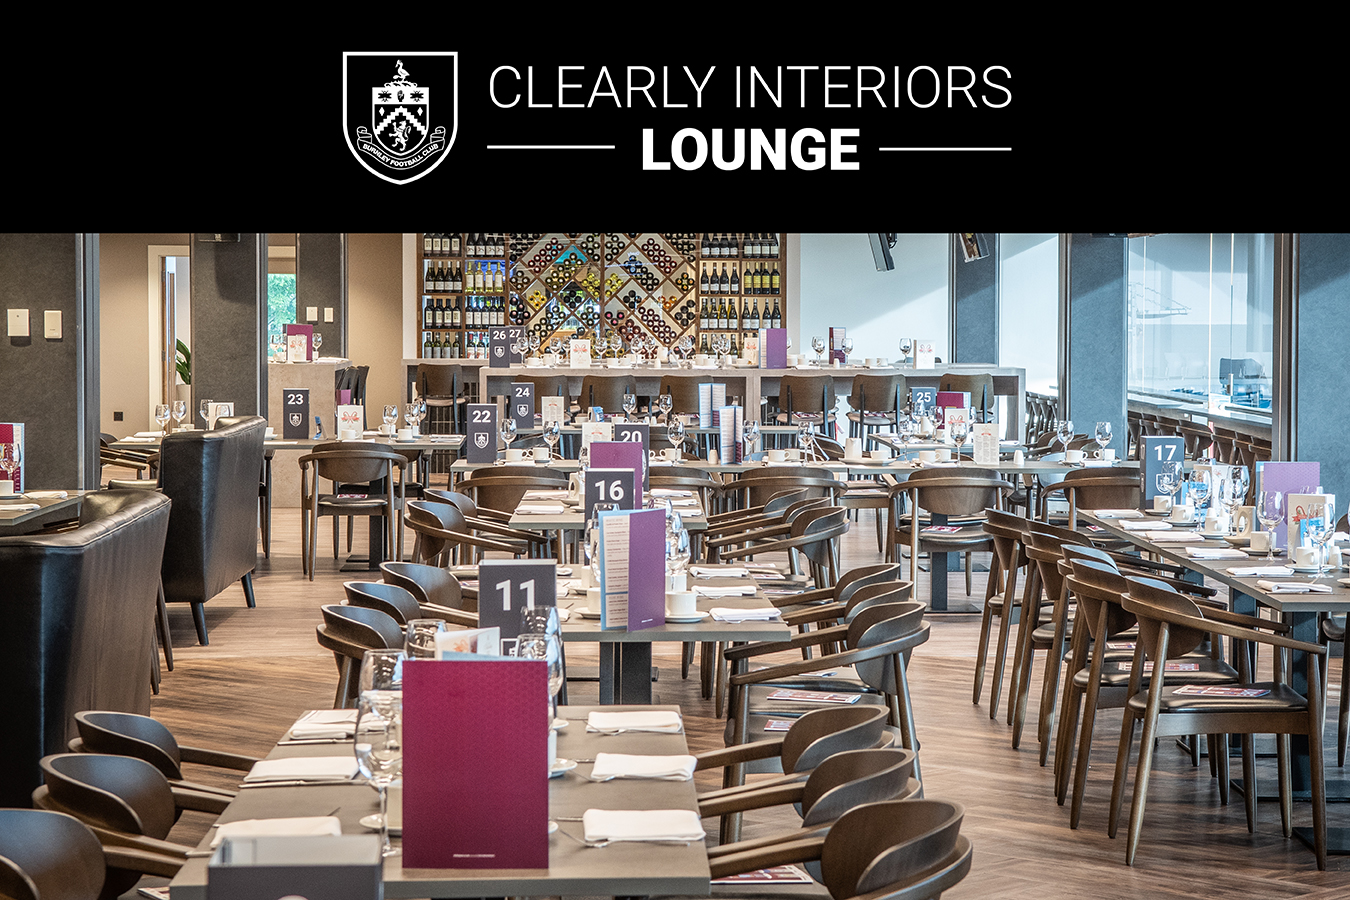 Clearly Interiors Lounge